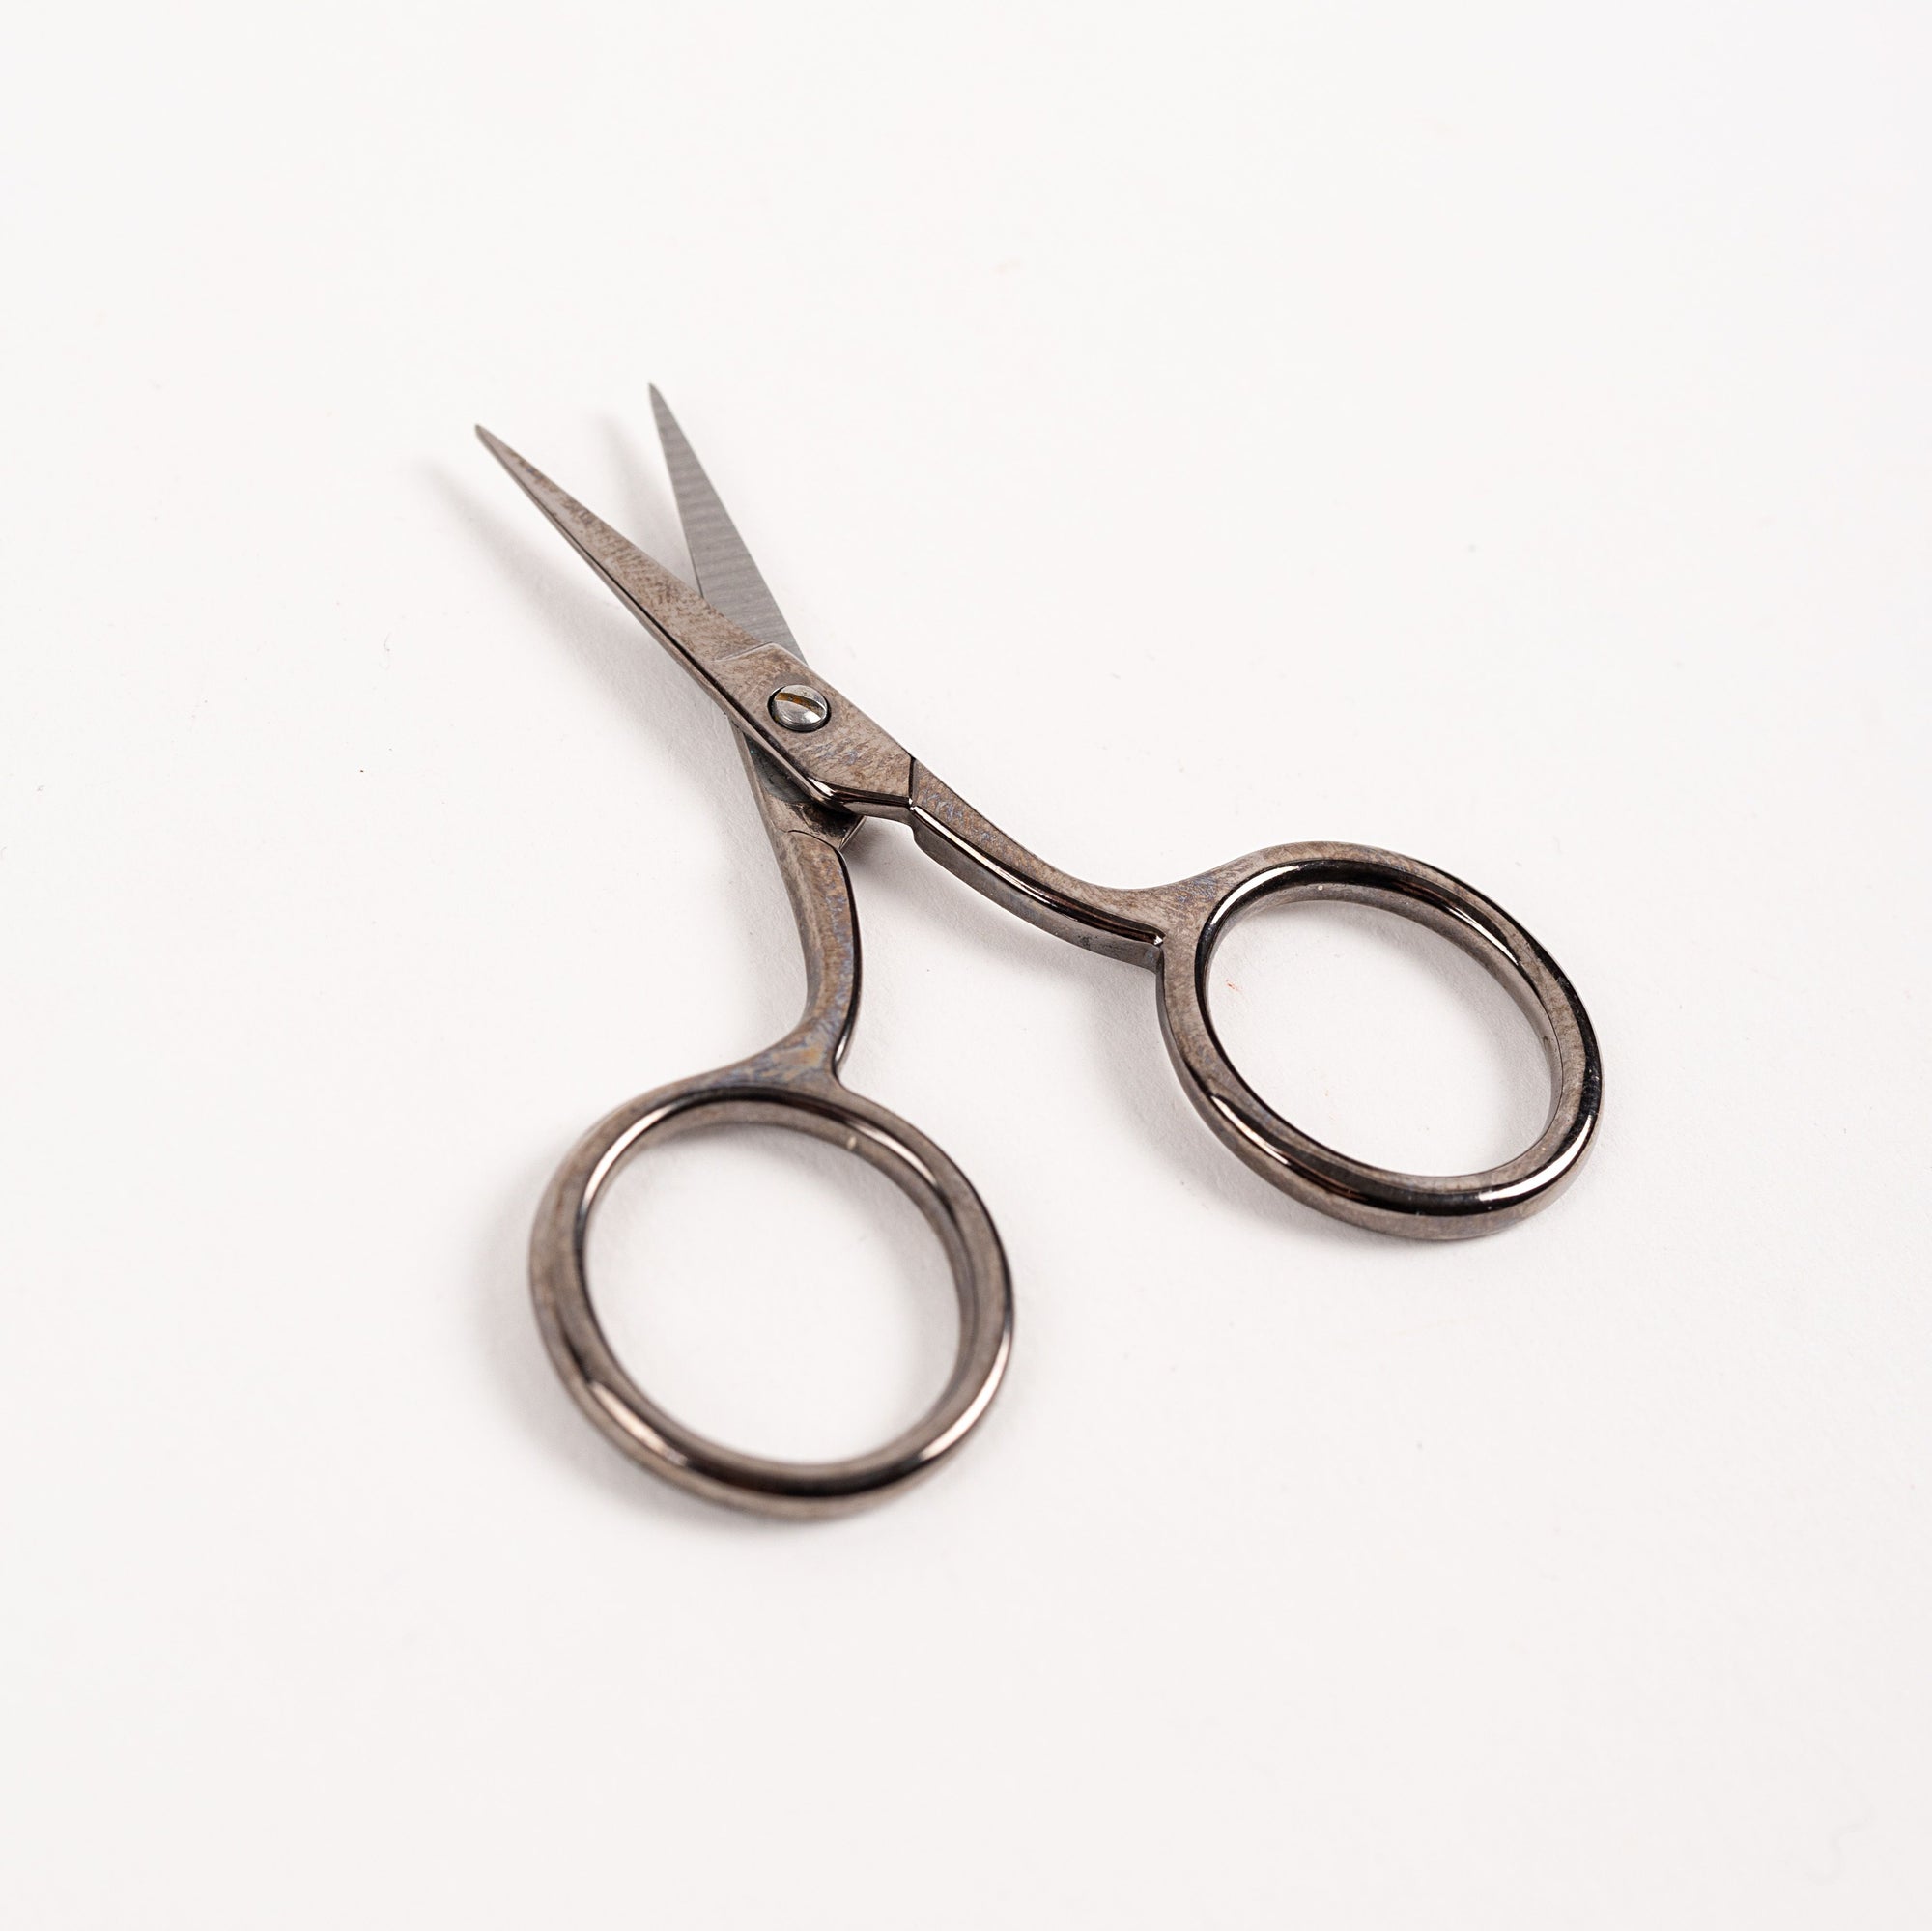 FINE POINT EMBROIDERY SCISSORS